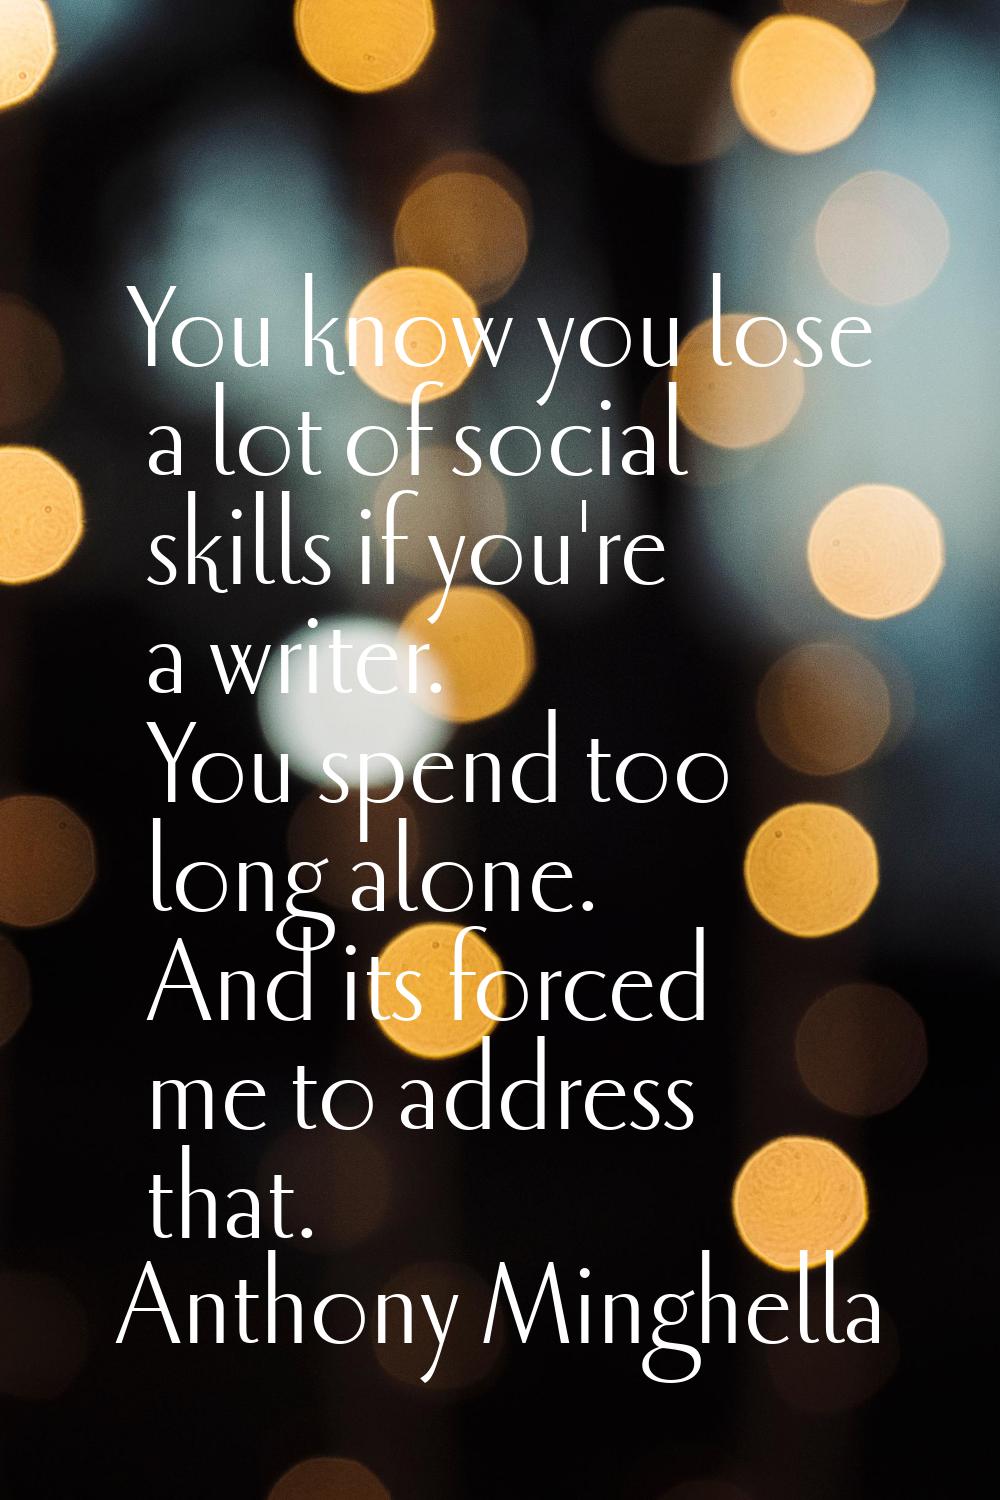 You know you lose a lot of social skills if you're a writer. You spend too long alone. And its forc